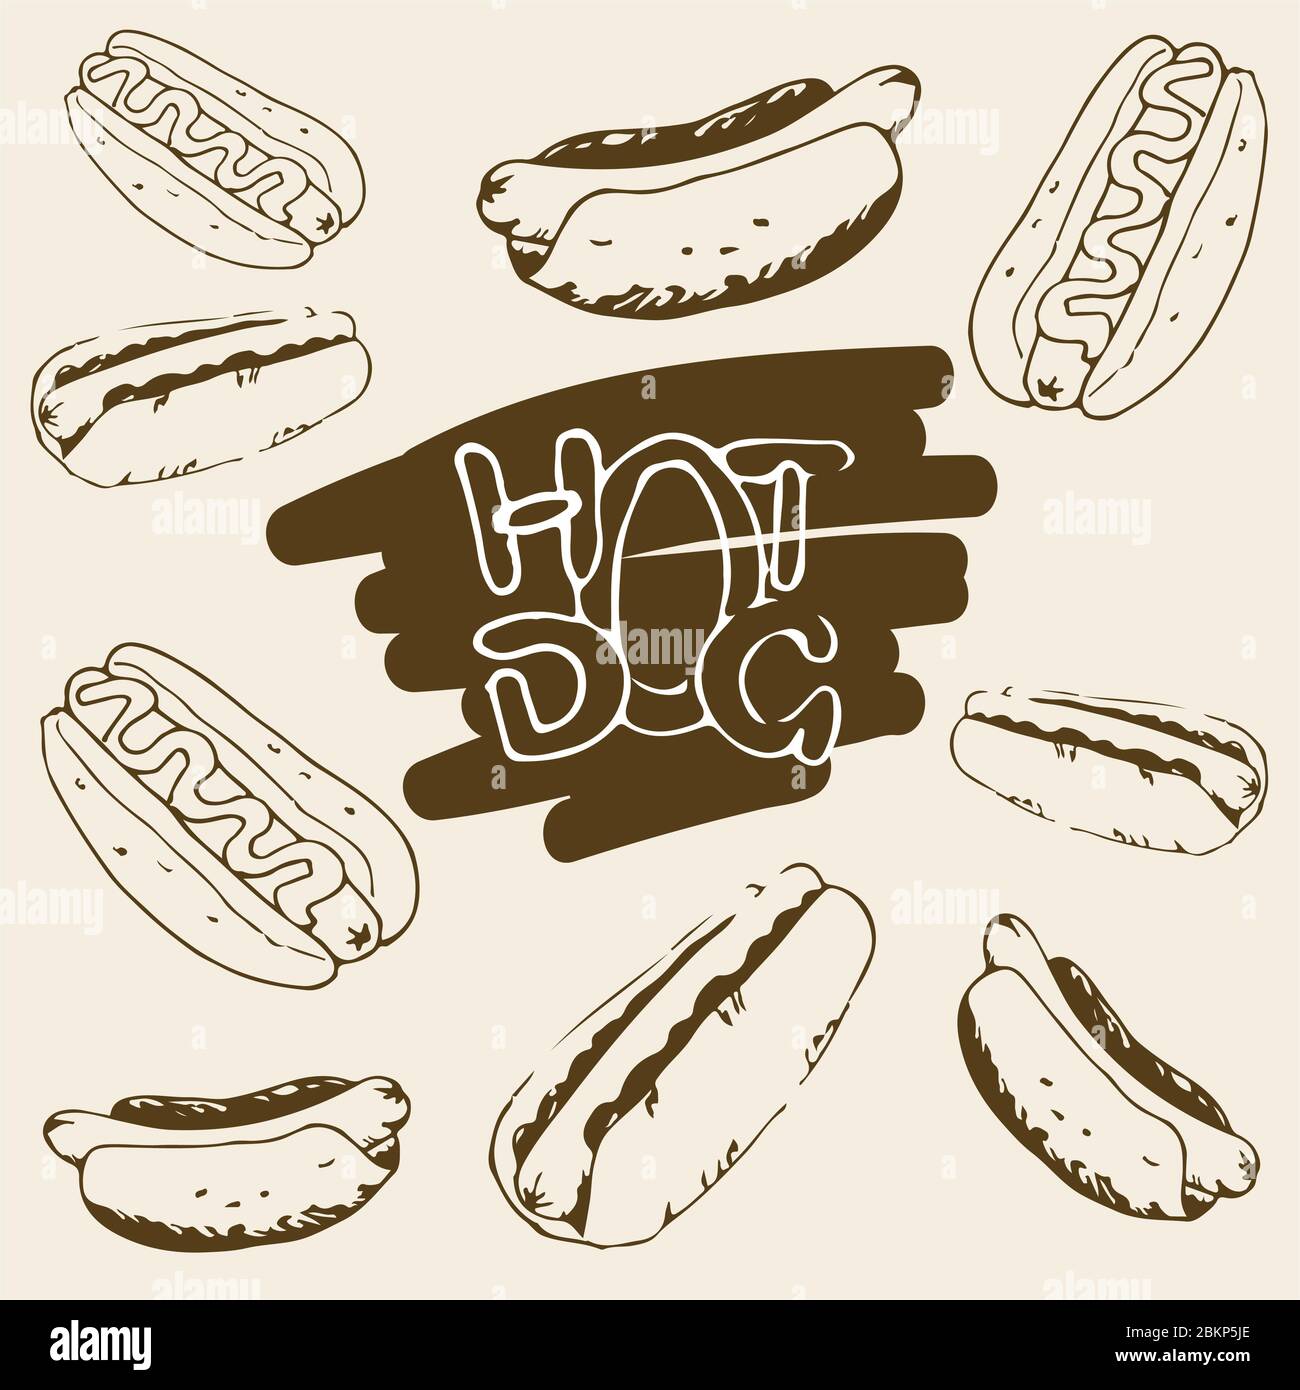 Hot Dog hand drawn illustrations. Fast food design elements, sketches of hotdogs with sauce and mayonnaise. Monochrome EPS8 vector graphics. Stock Vector